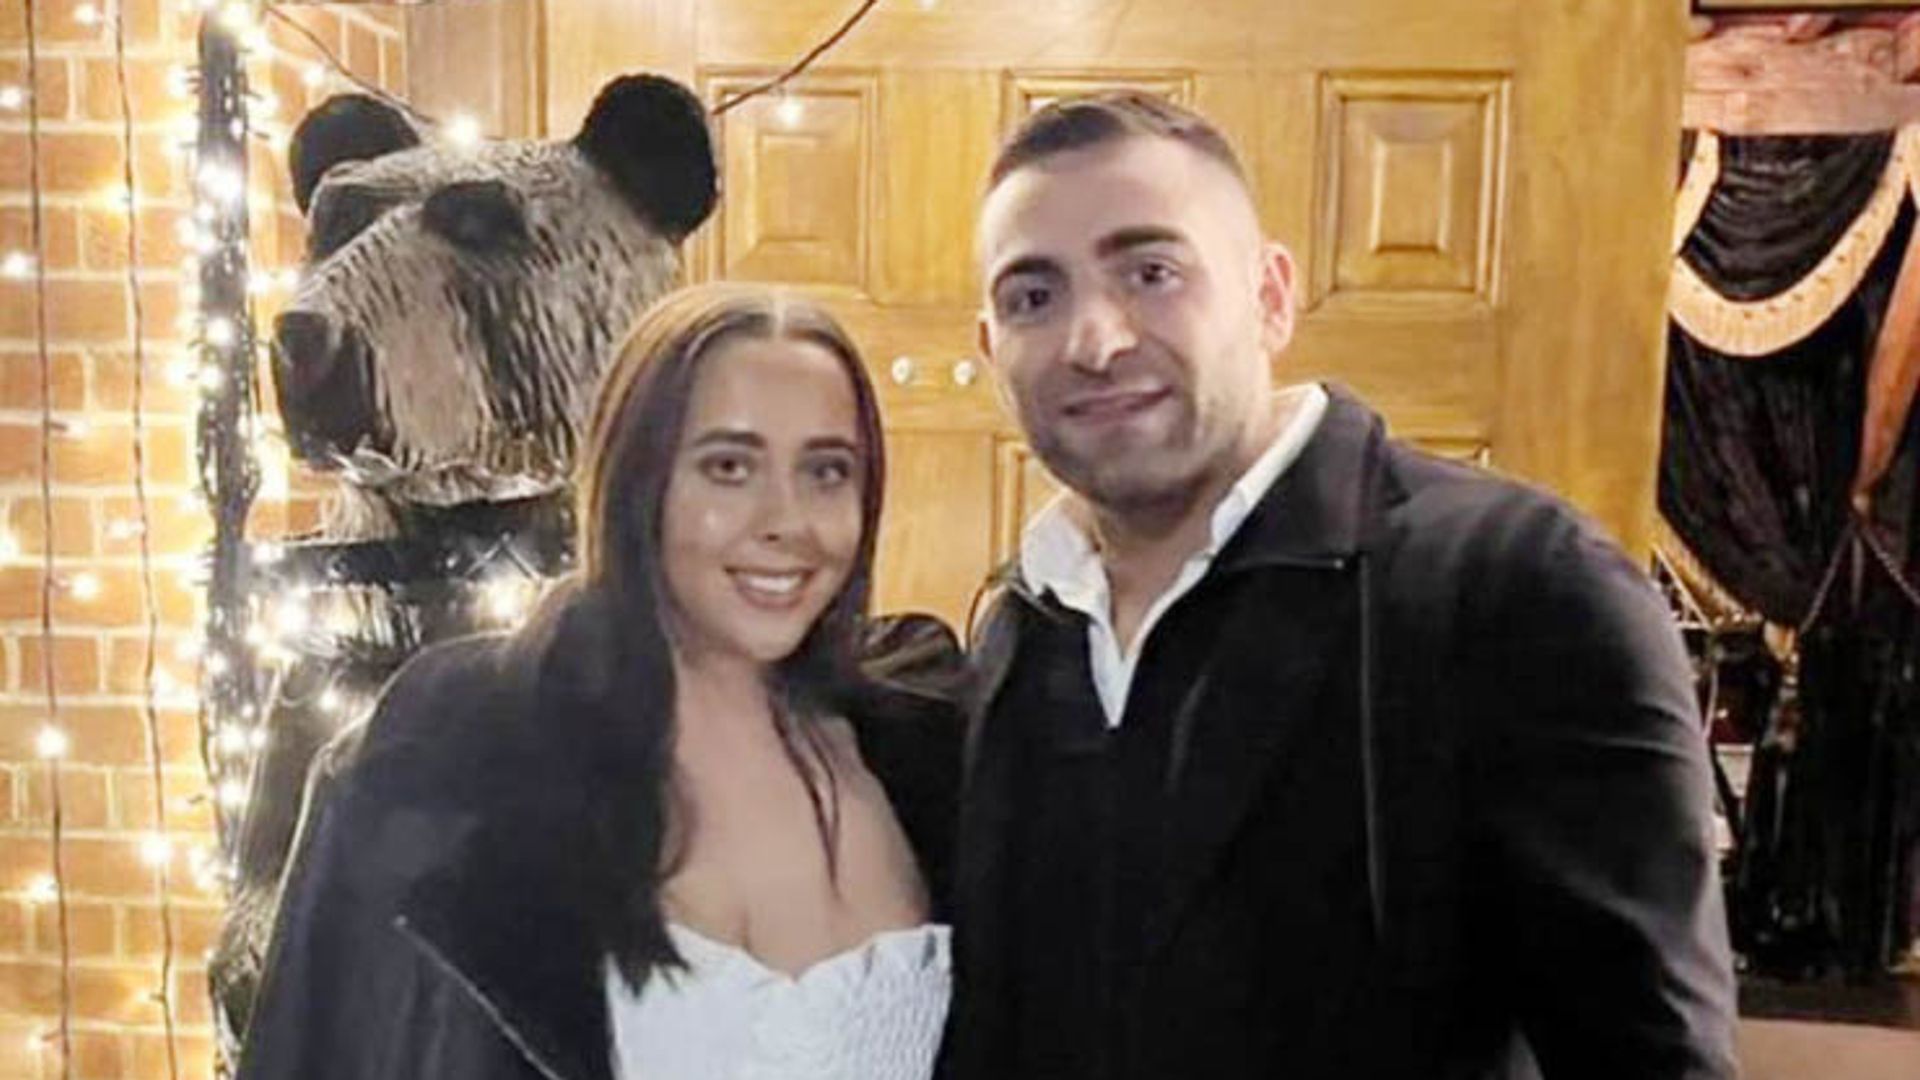 Boyfriend of crossbow attack victim pays tribute to 'love of my life'